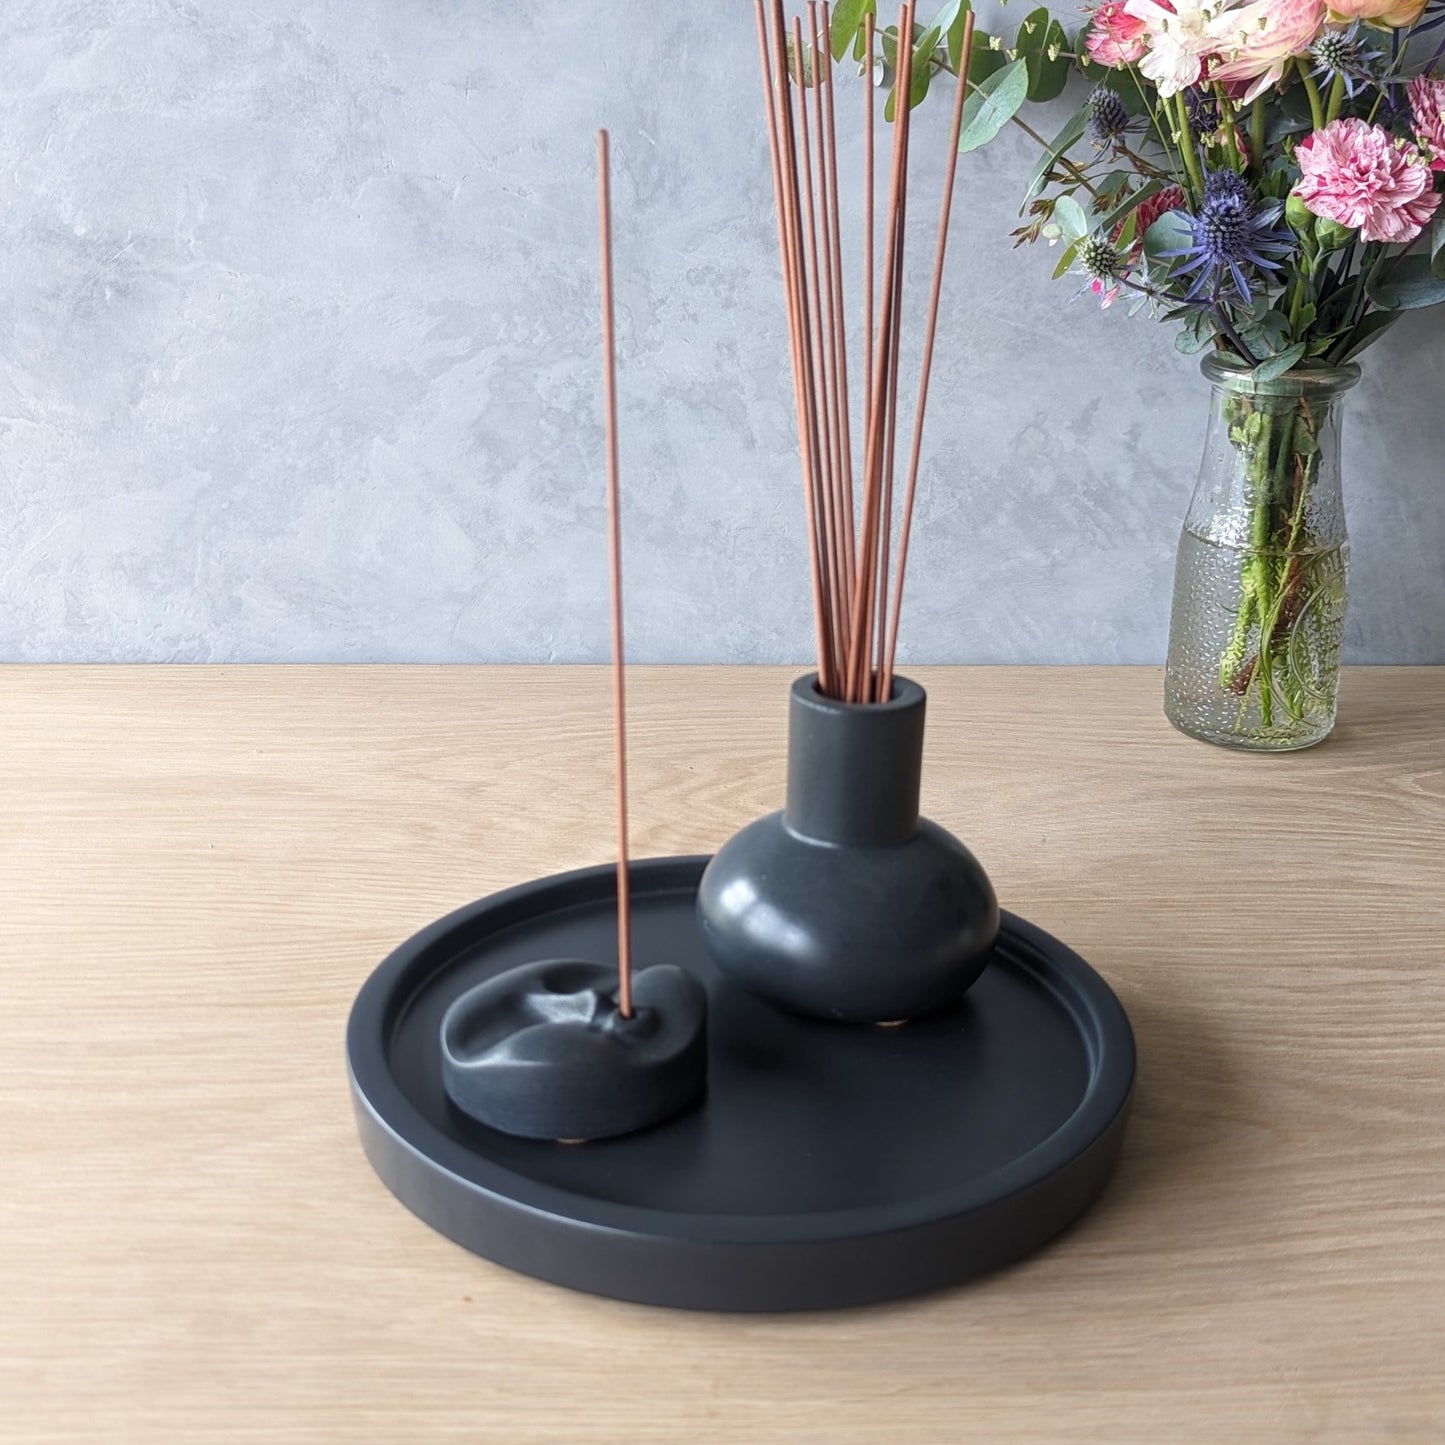 Concrete Incense Burner Set with Holder and Tray